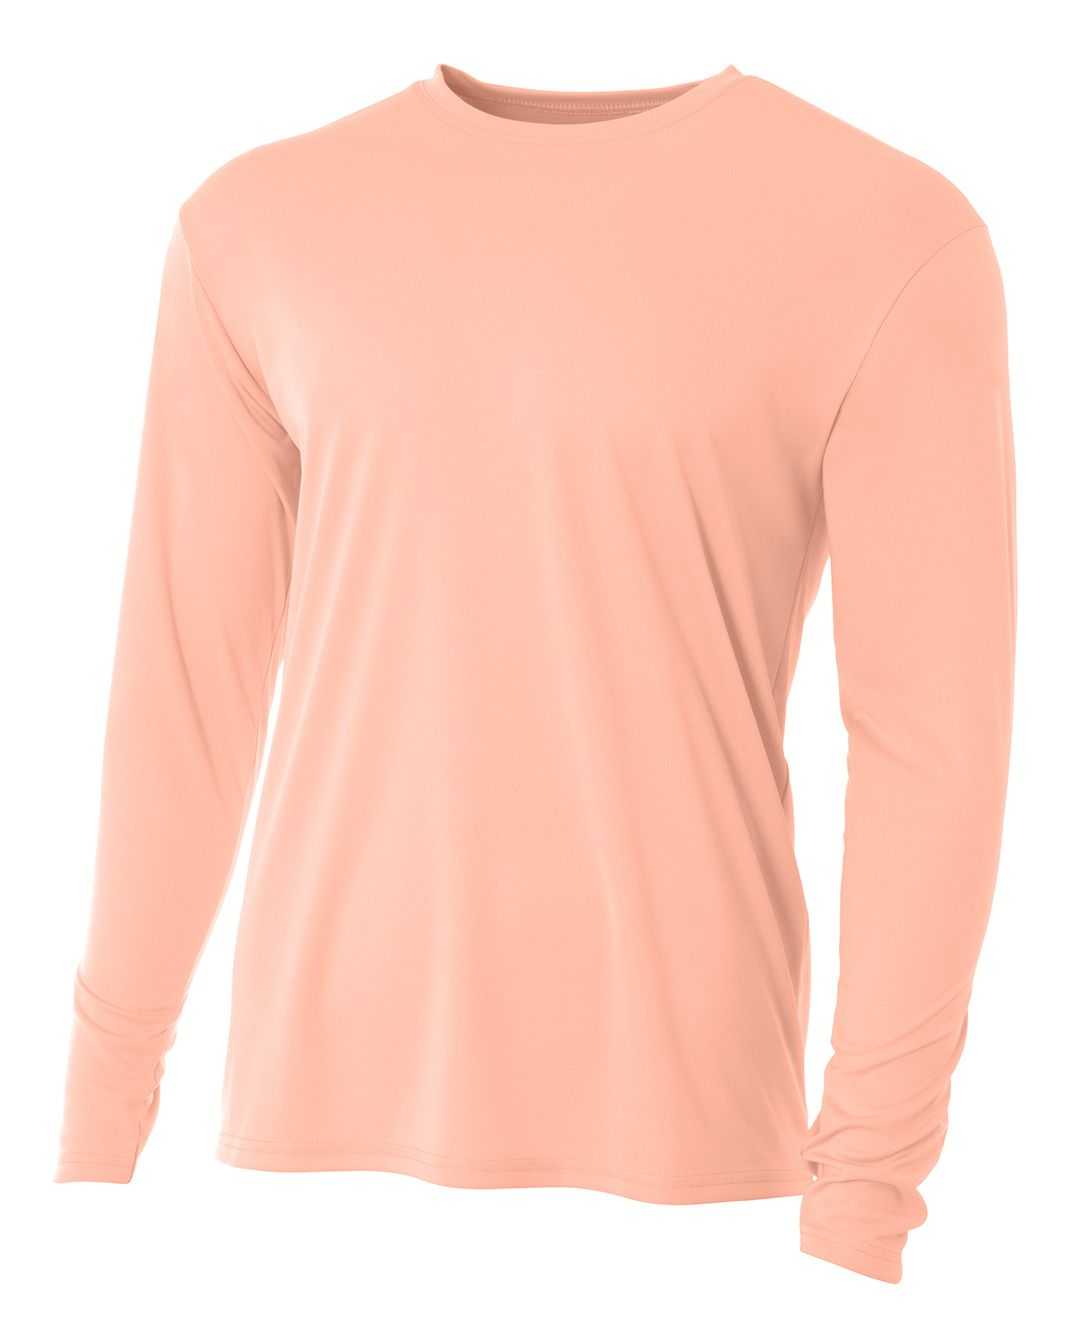 A4 N3165 Men'S Cooling Performance Long Sleeve T-Shirt - Samon - HIT a Double - 1